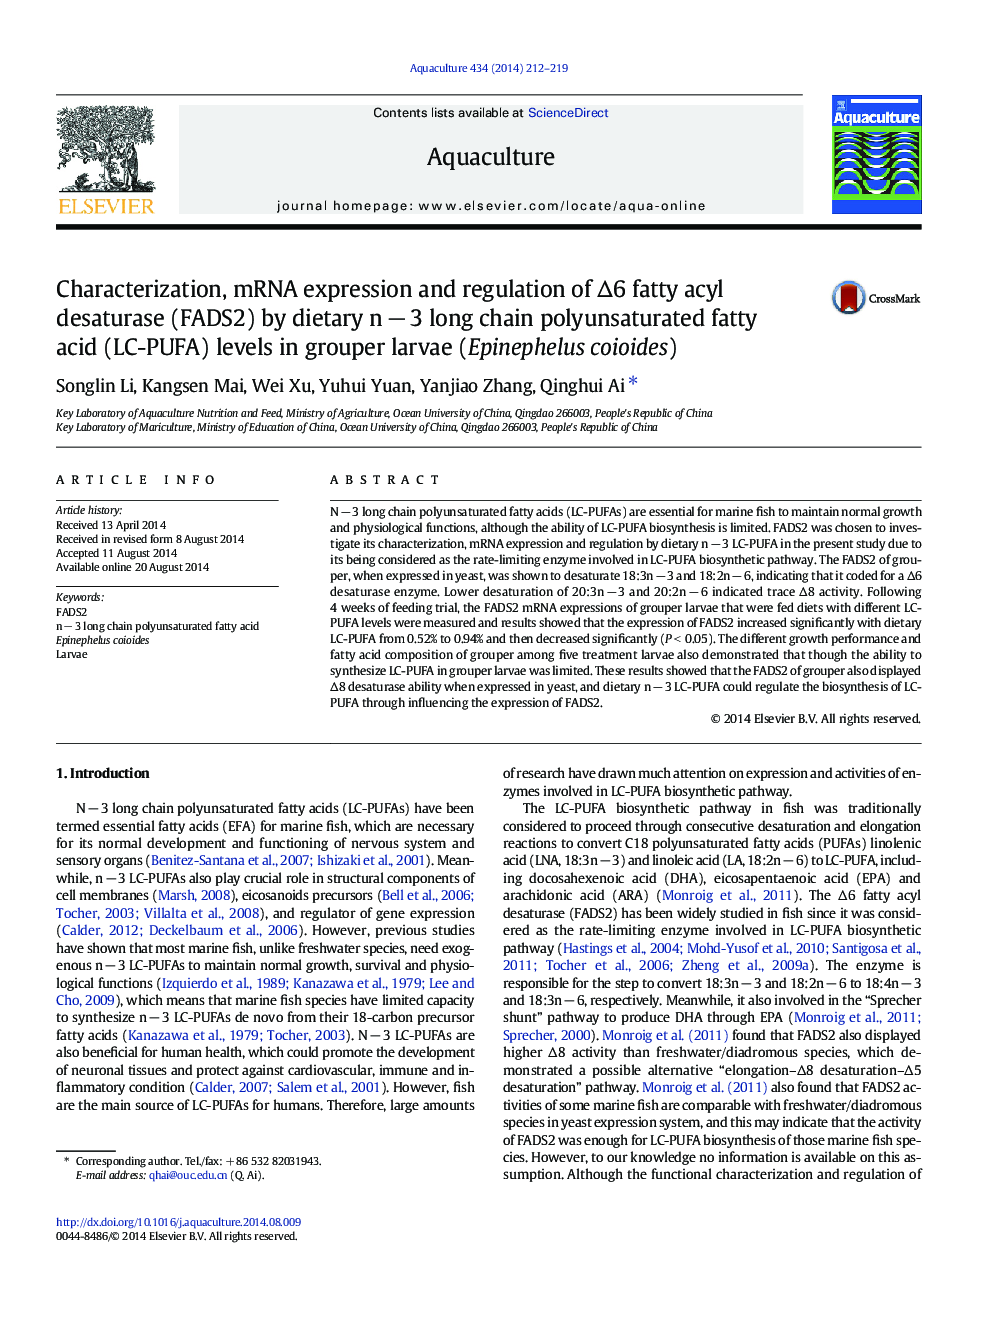 Characterization, mRNA expression and regulation of Δ6 fatty acyl desaturase (FADS2) by dietary n − 3 long chain polyunsaturated fatty acid (LC-PUFA) levels in grouper larvae (Epinephelus coioides)